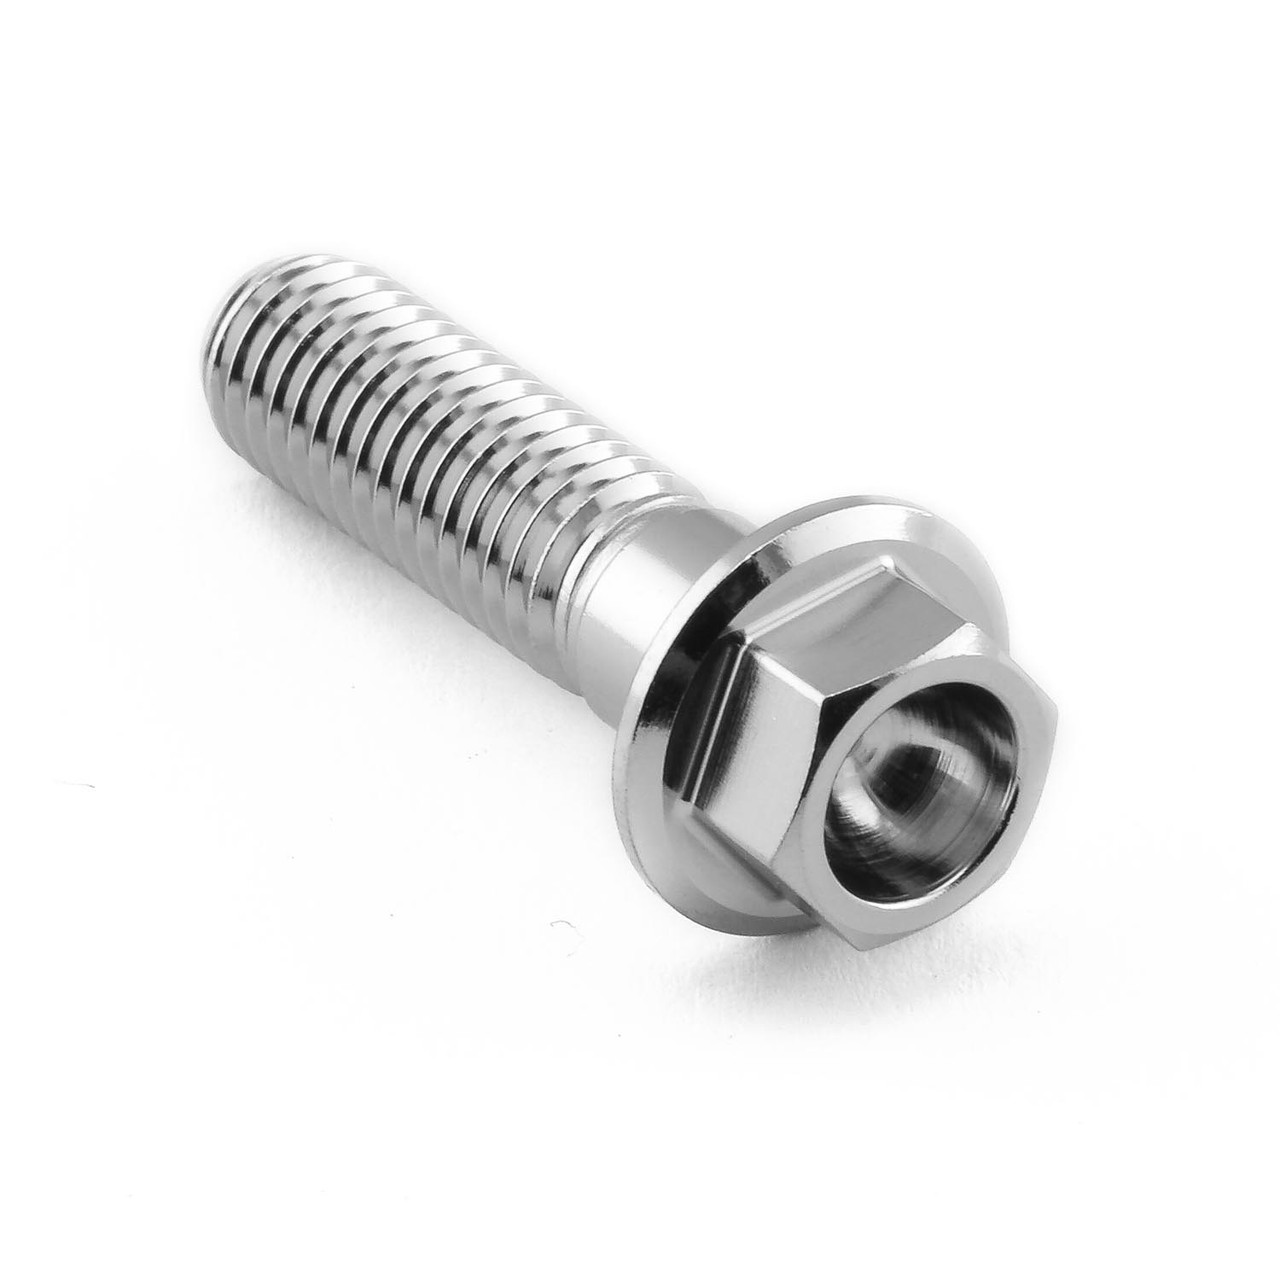 Hex Bolts Distributor - 316 Stainless Steel Hex Bolts